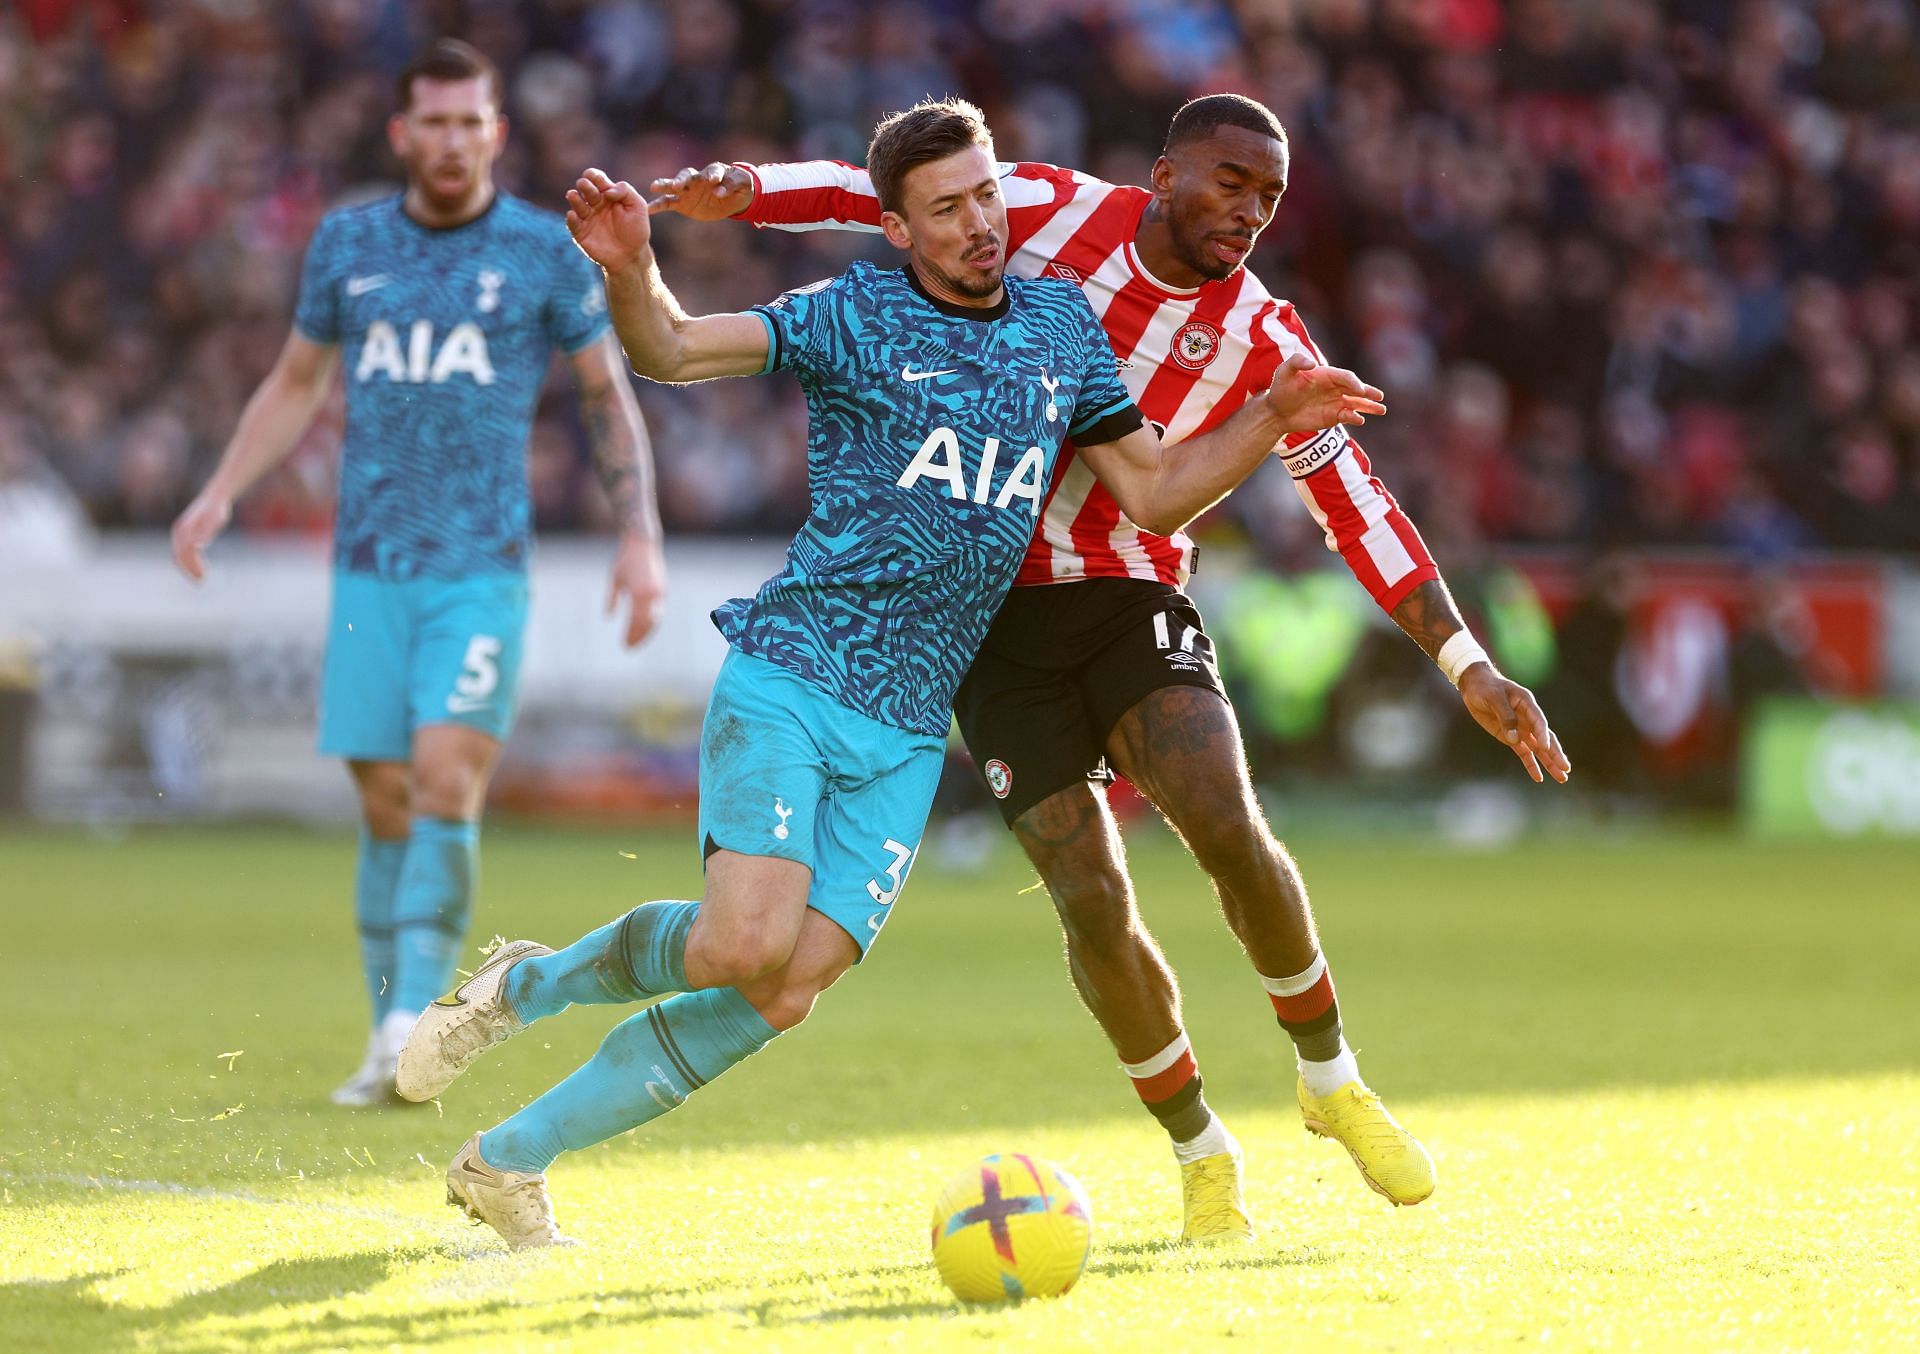 Tottenham played out a thrilling 2-2 draw with Brentford today.